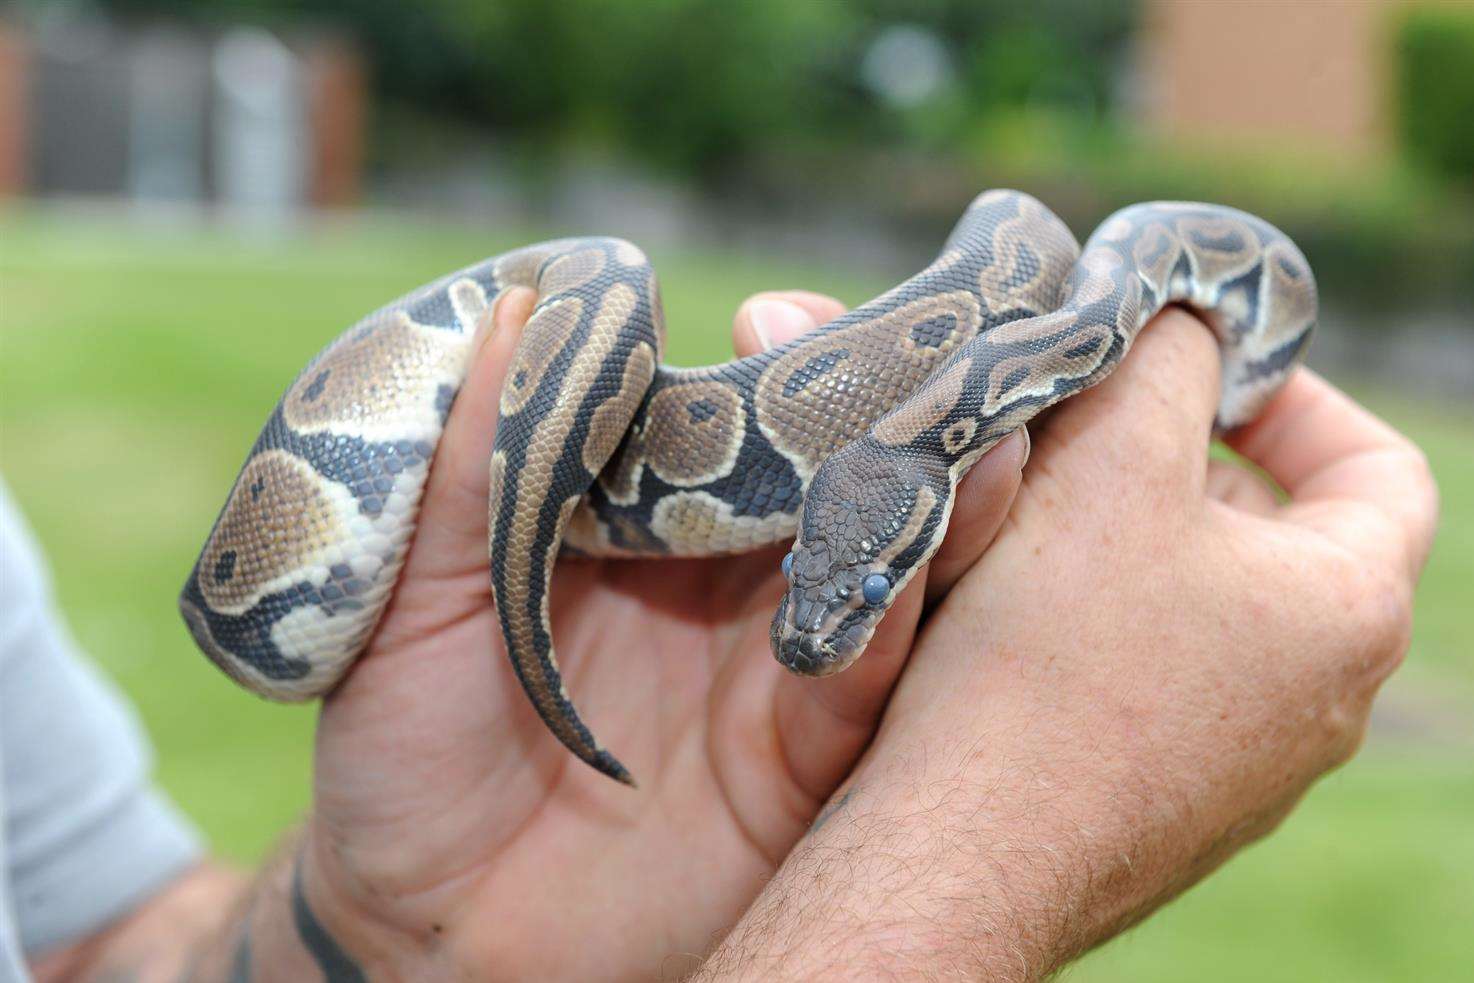 A Royal Python, age three years old.